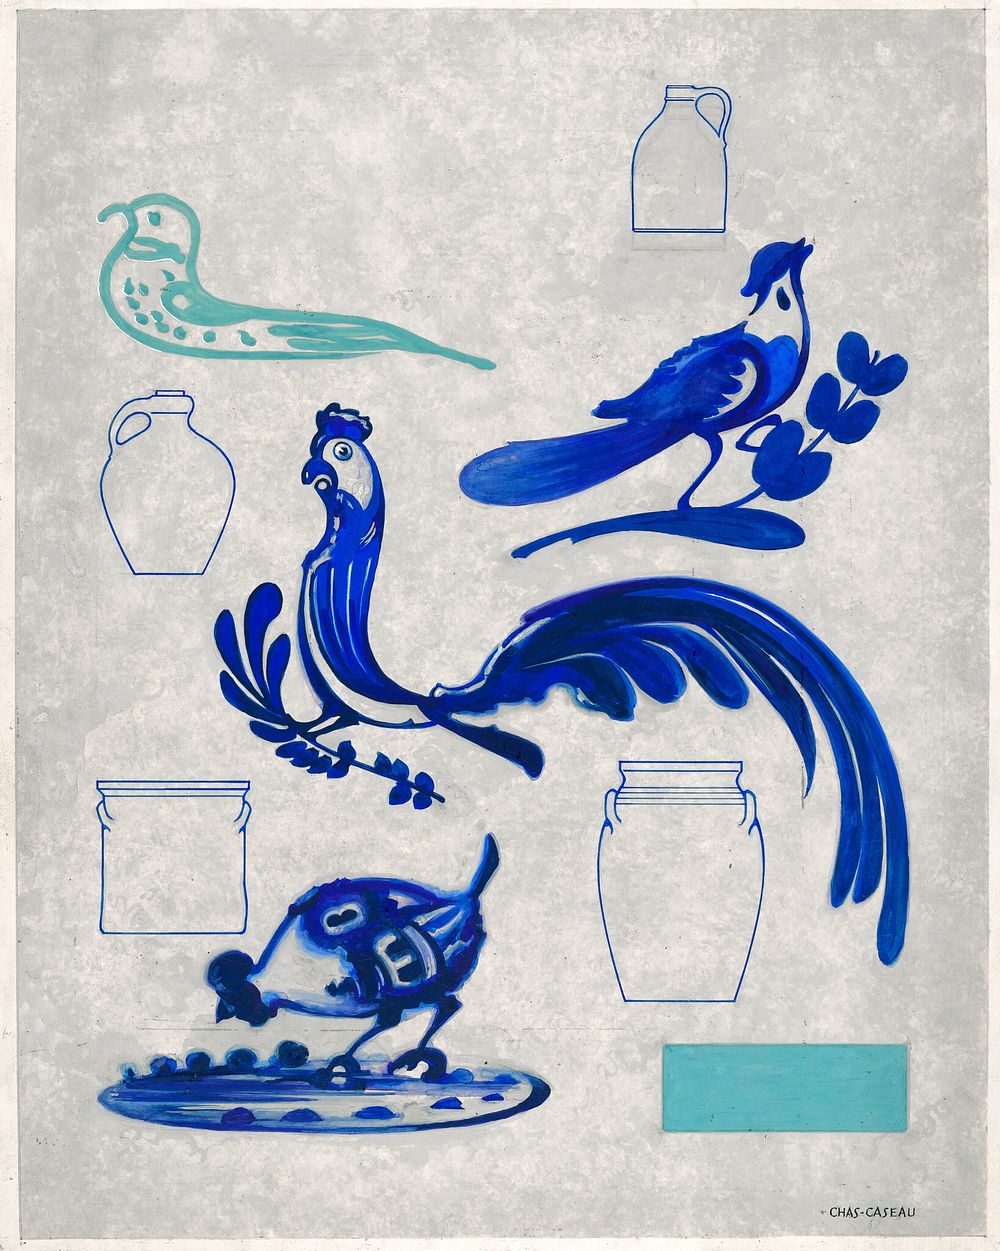 Bird Decorations on Jug (1935-1942) by Charles Caseau. Original from The National Gallery of Art. Digitally enhanced by…